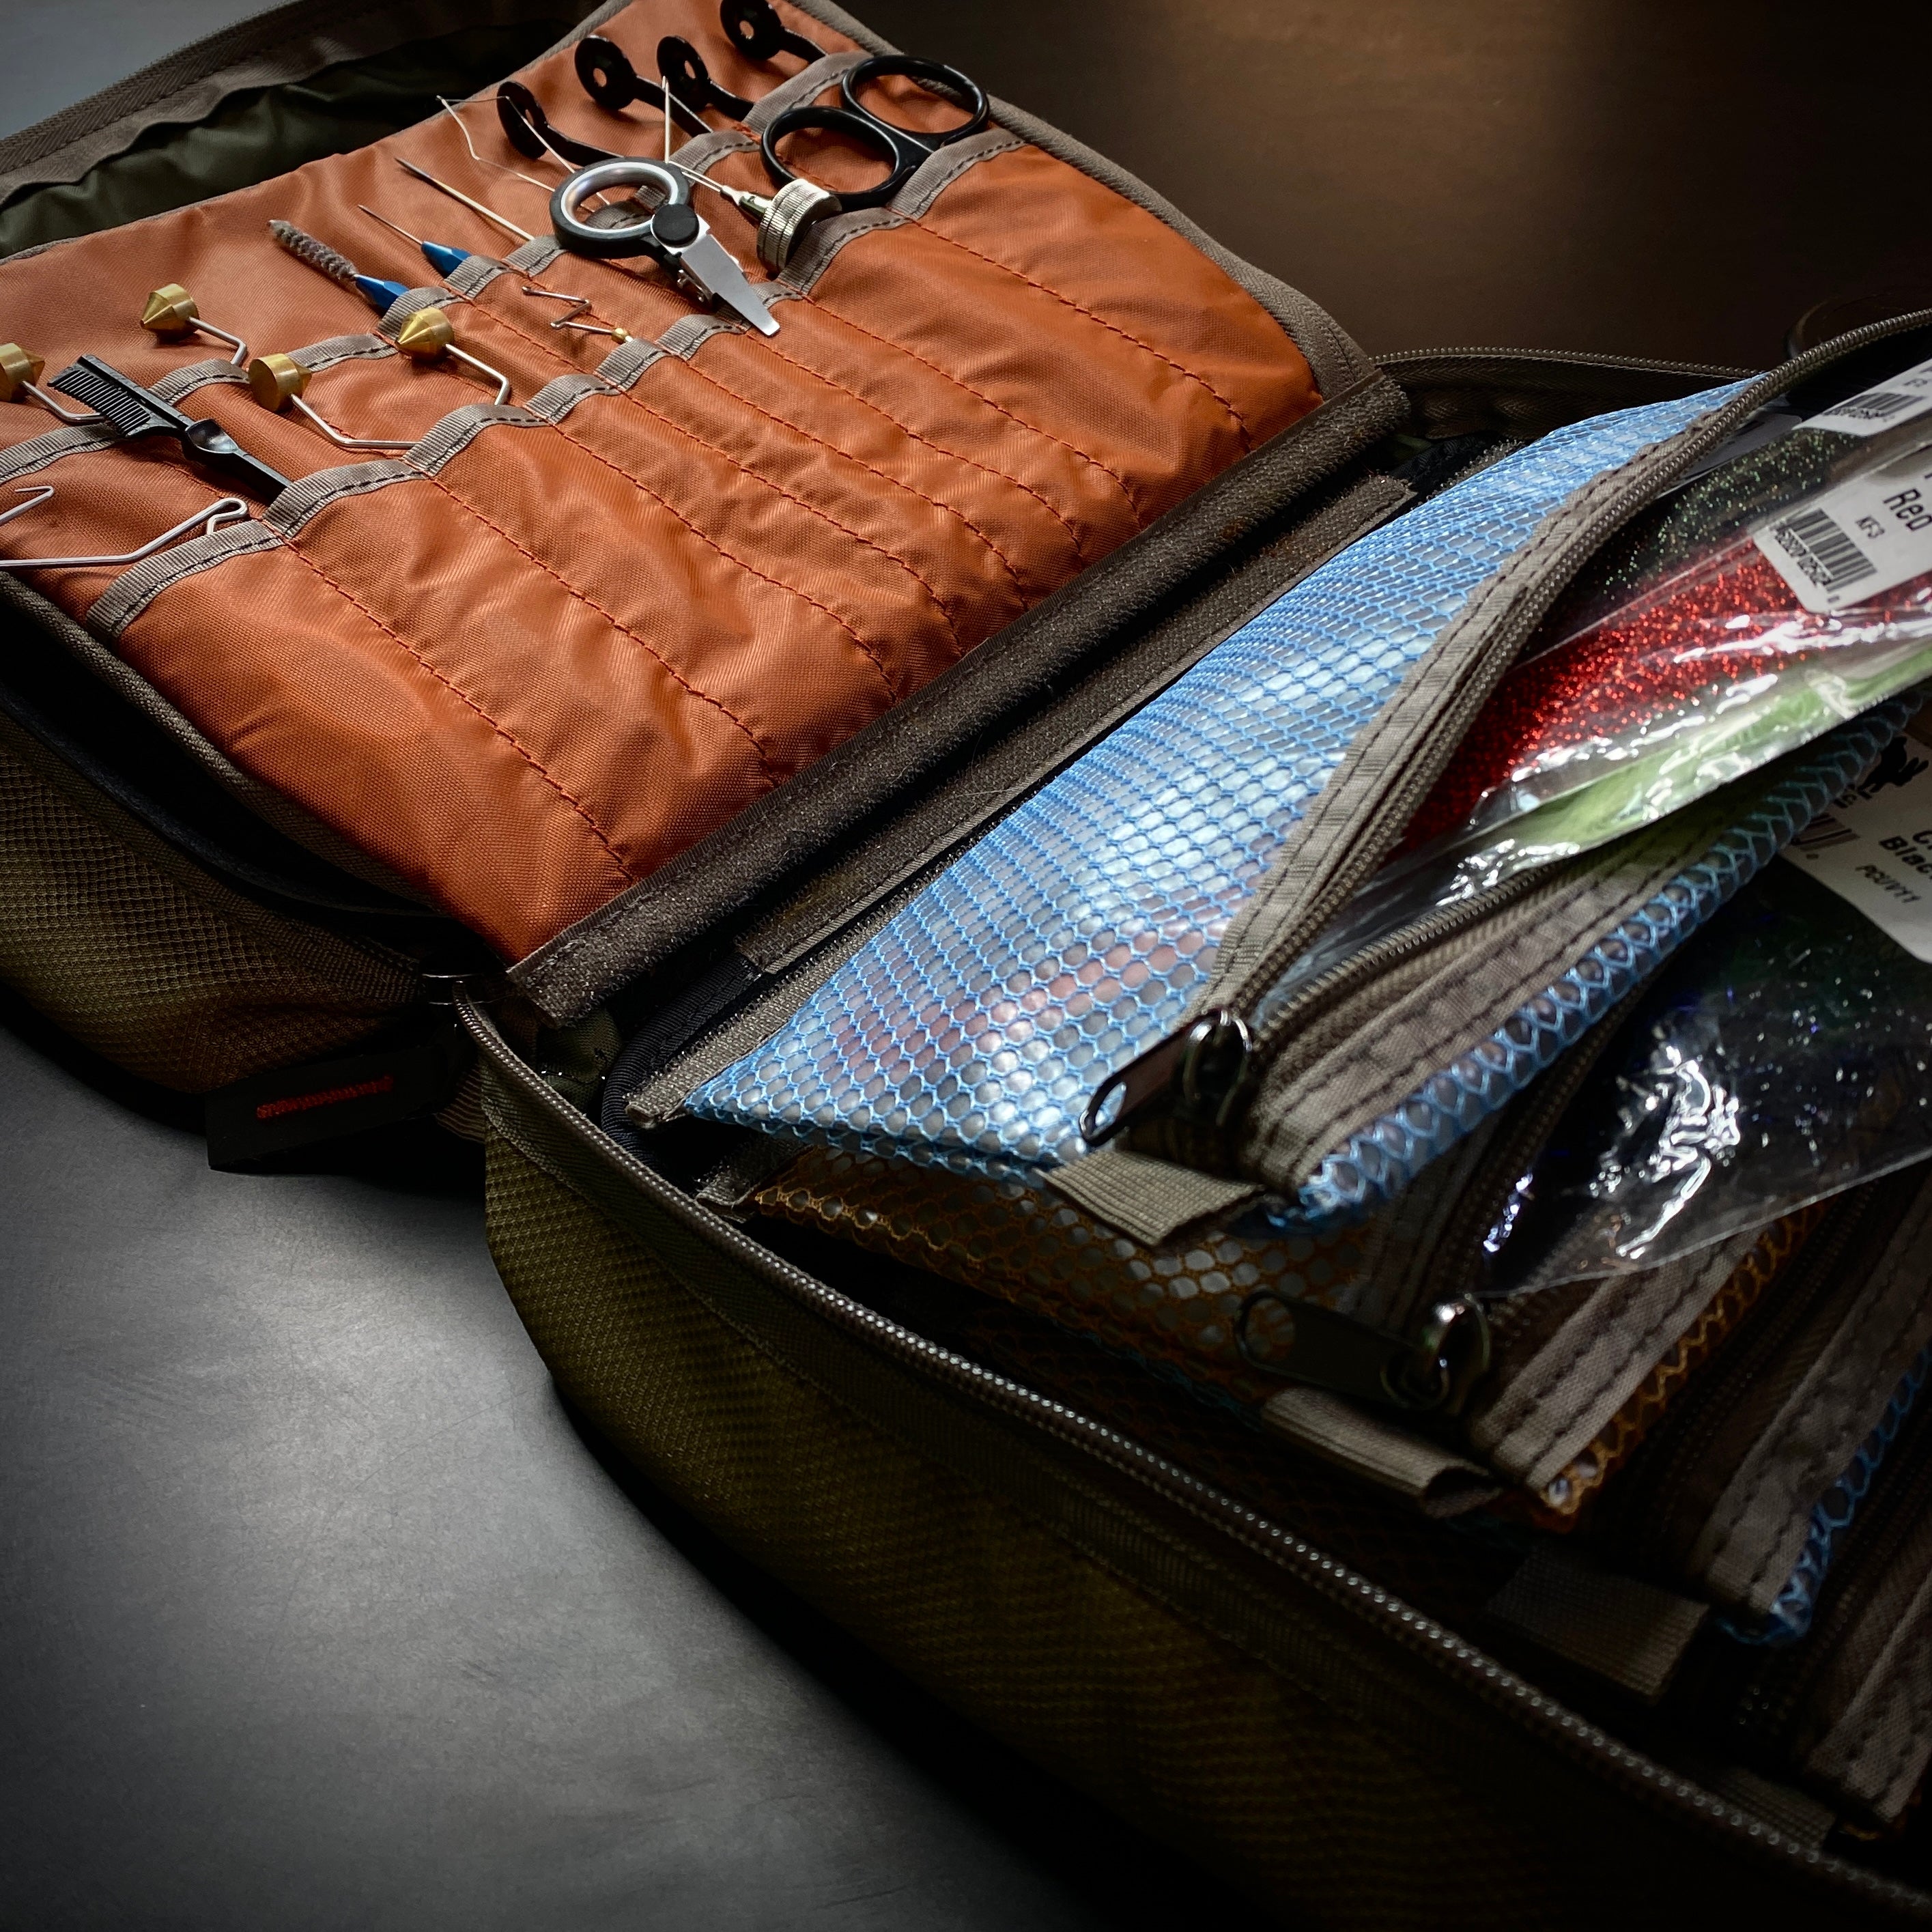 Fly Fishing Storage & Wading Bags